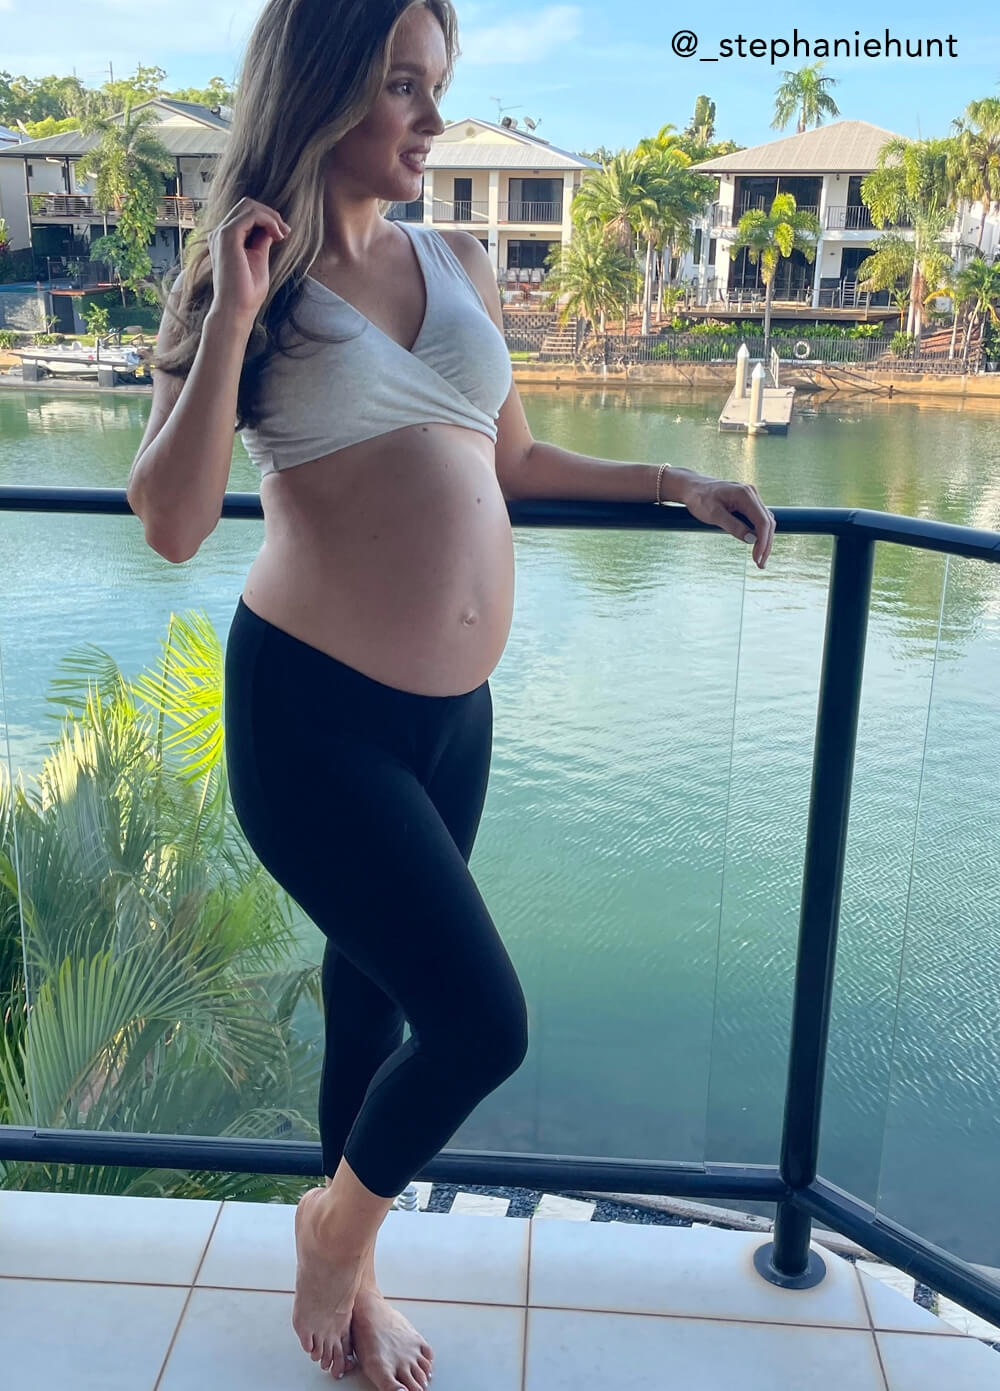 Oasis 3/4 Black Maternity Leggings by Trimester Clothing